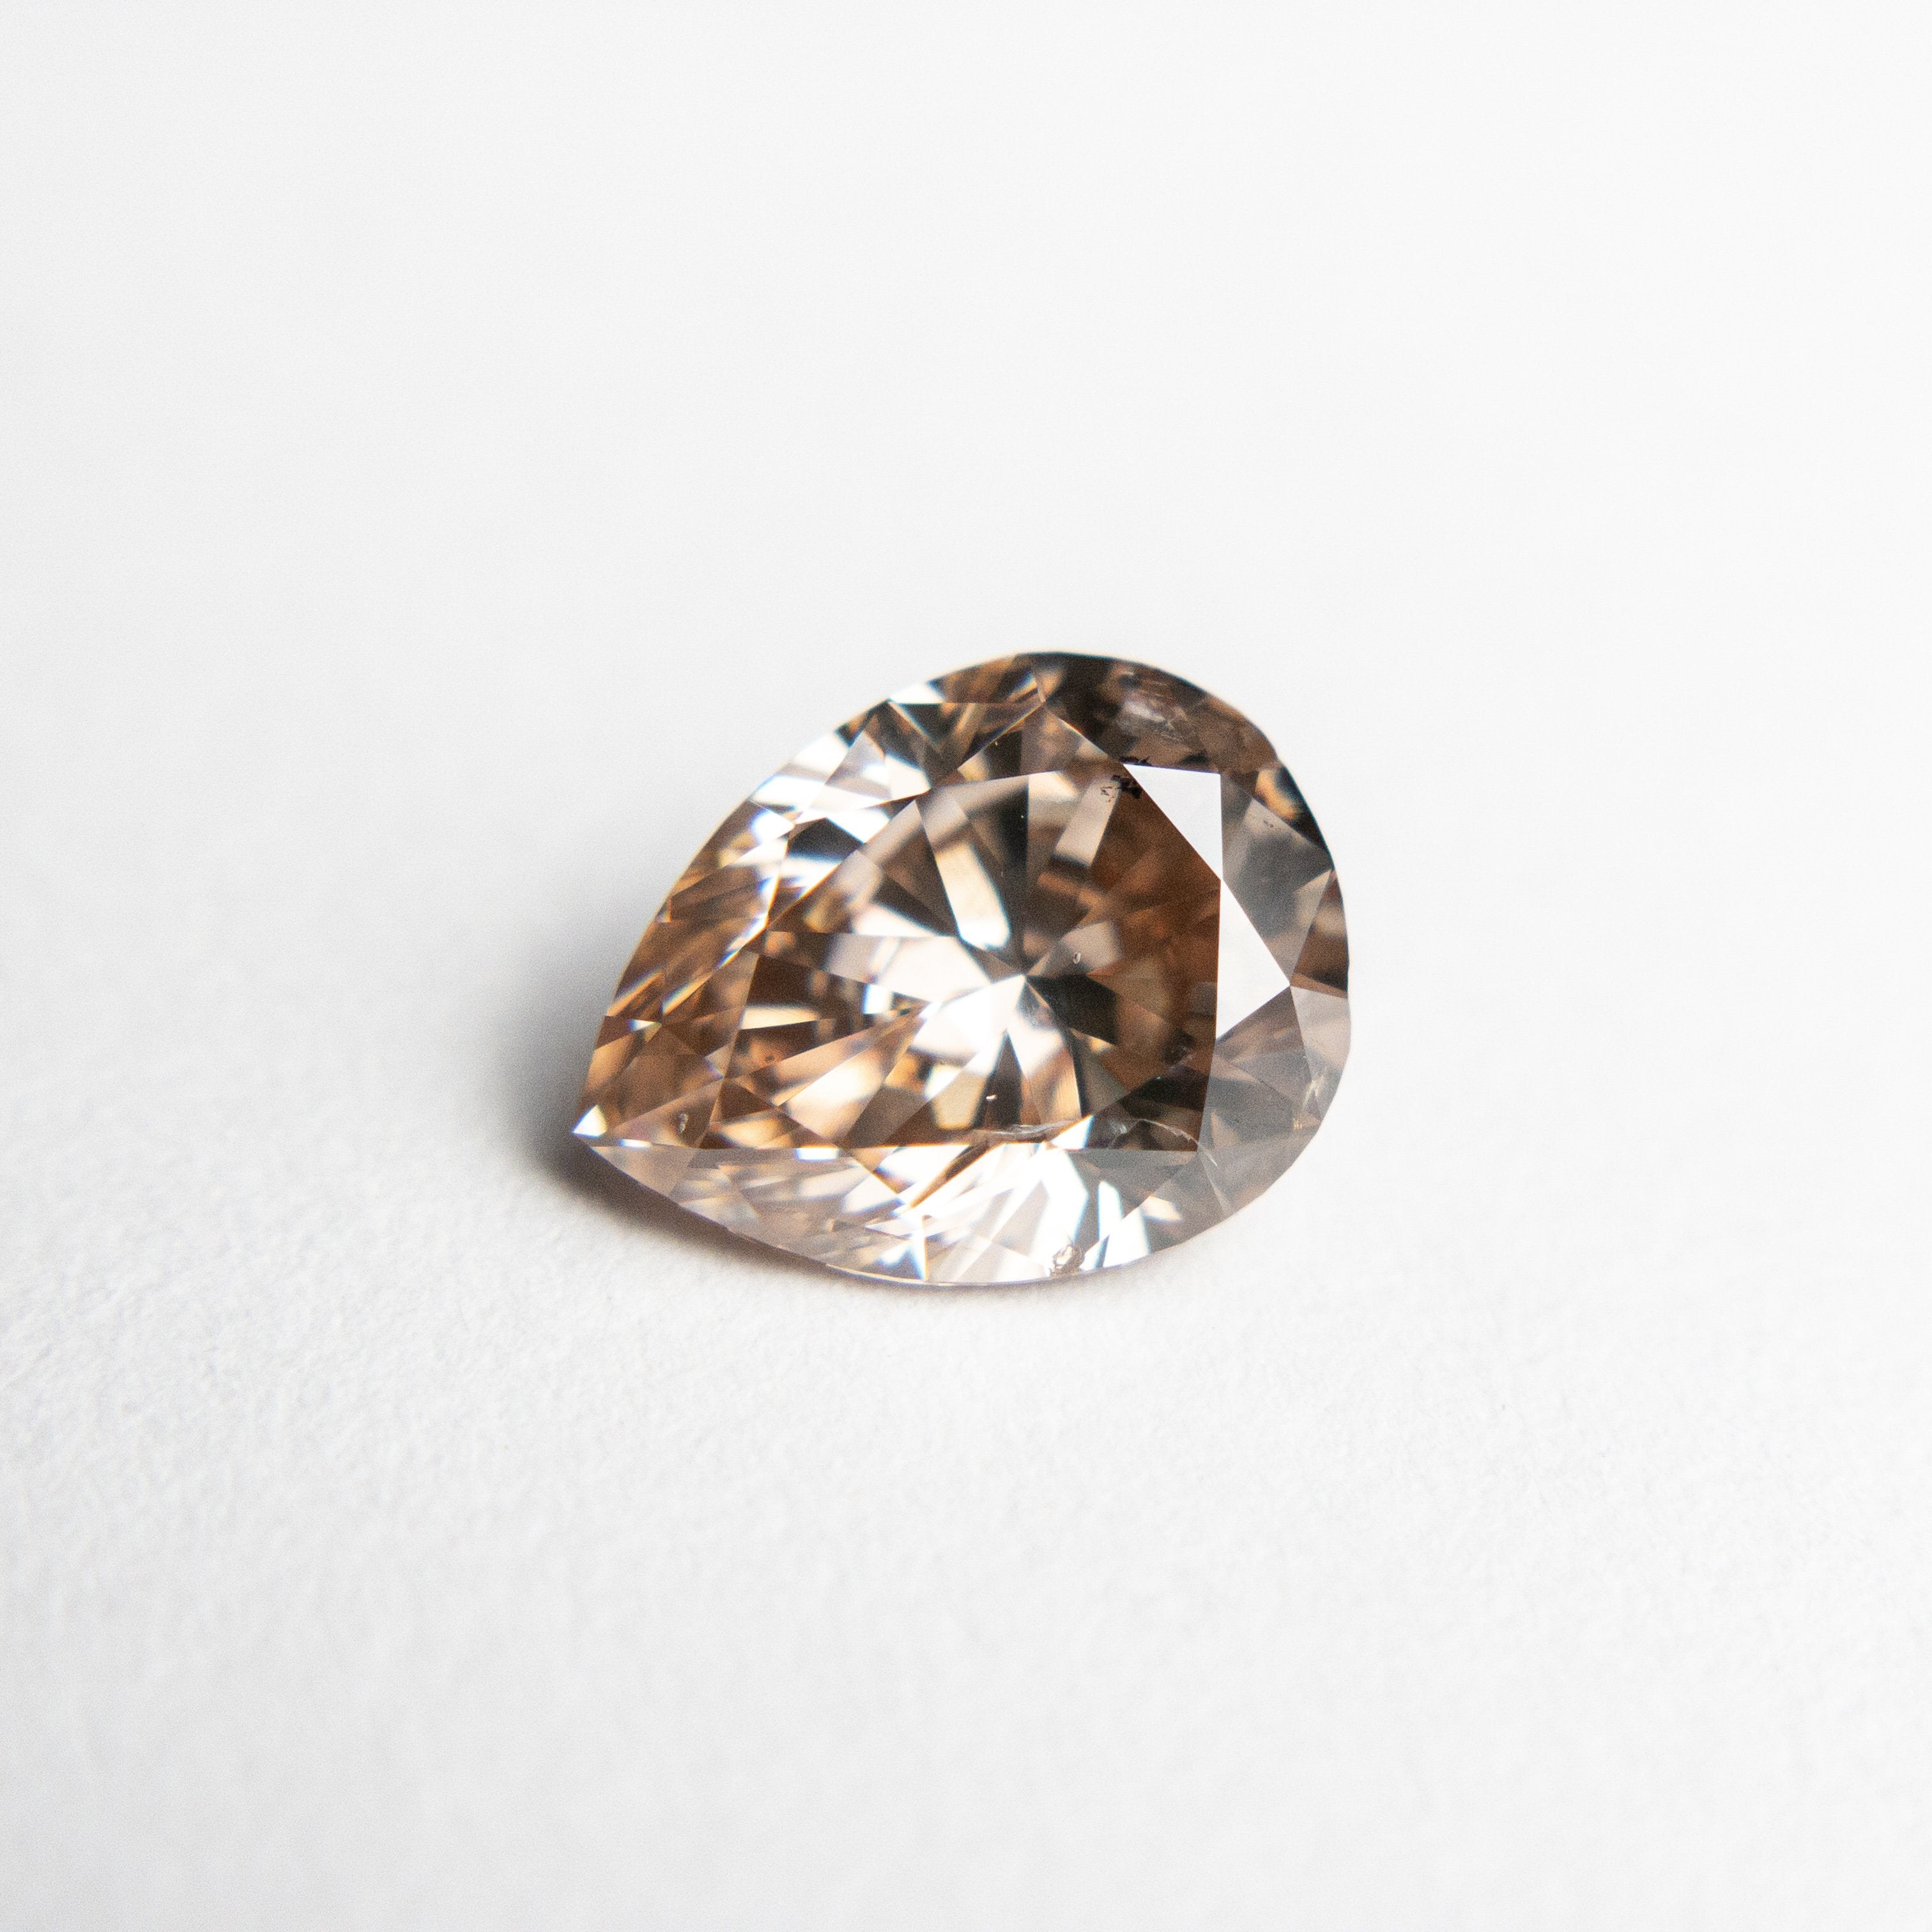 1.06ct 7.73x5.92x3.64mm Argyle GIA I1 Fancy Brown Pink Pear Brilliant 18562-01 HOLD D1922